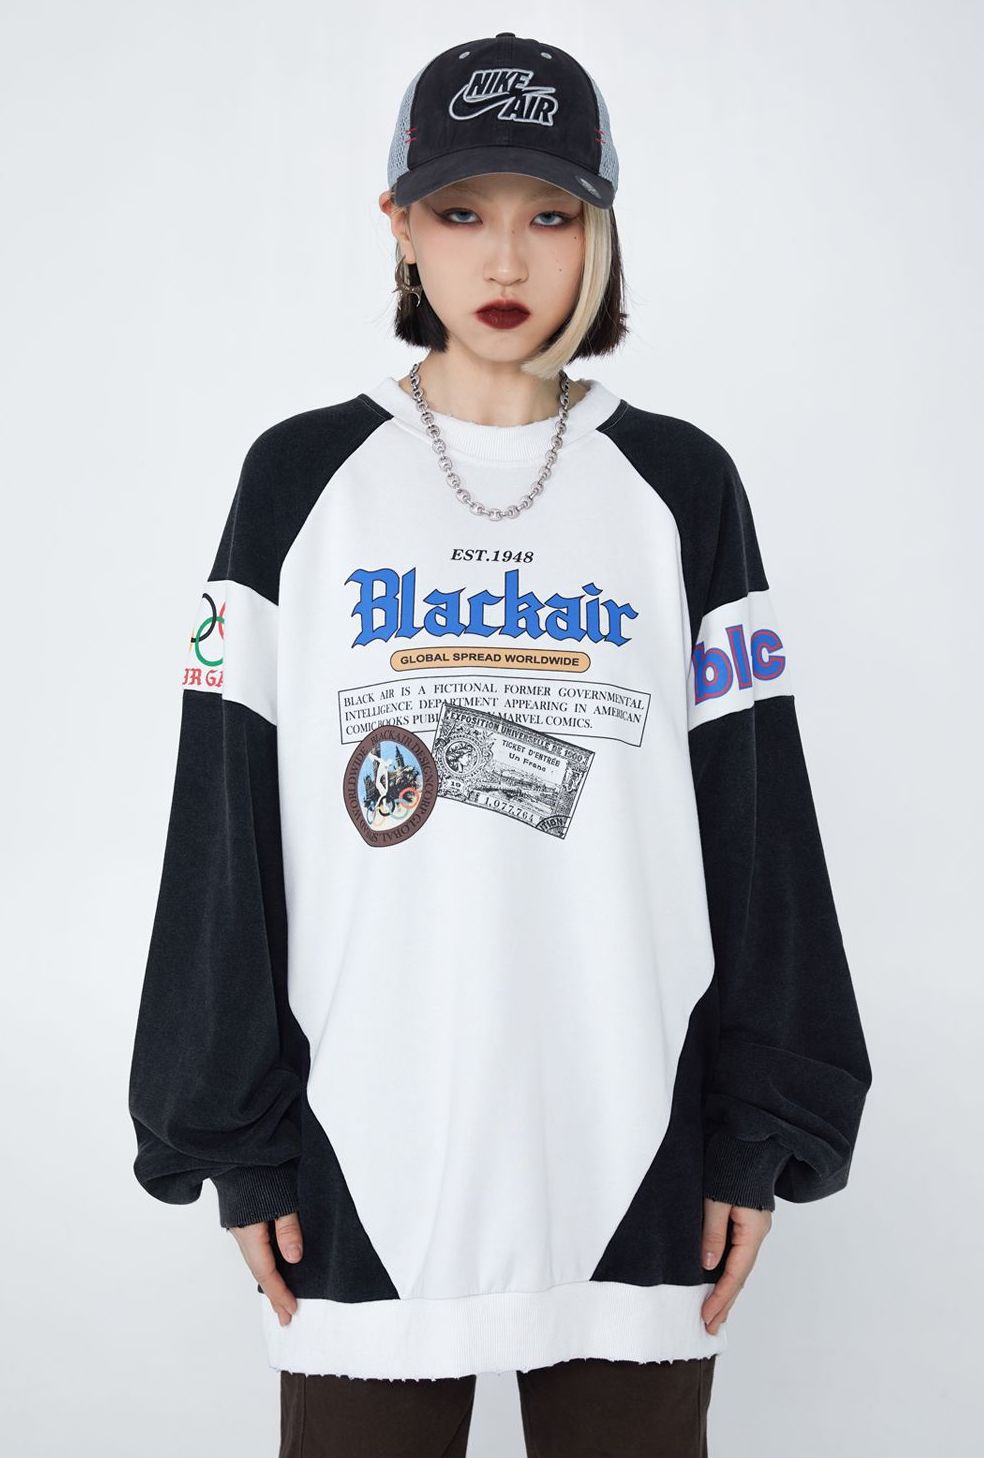 MADE EXTREME Black Air Bi-color L/S Top - YOUAREMYPOISON